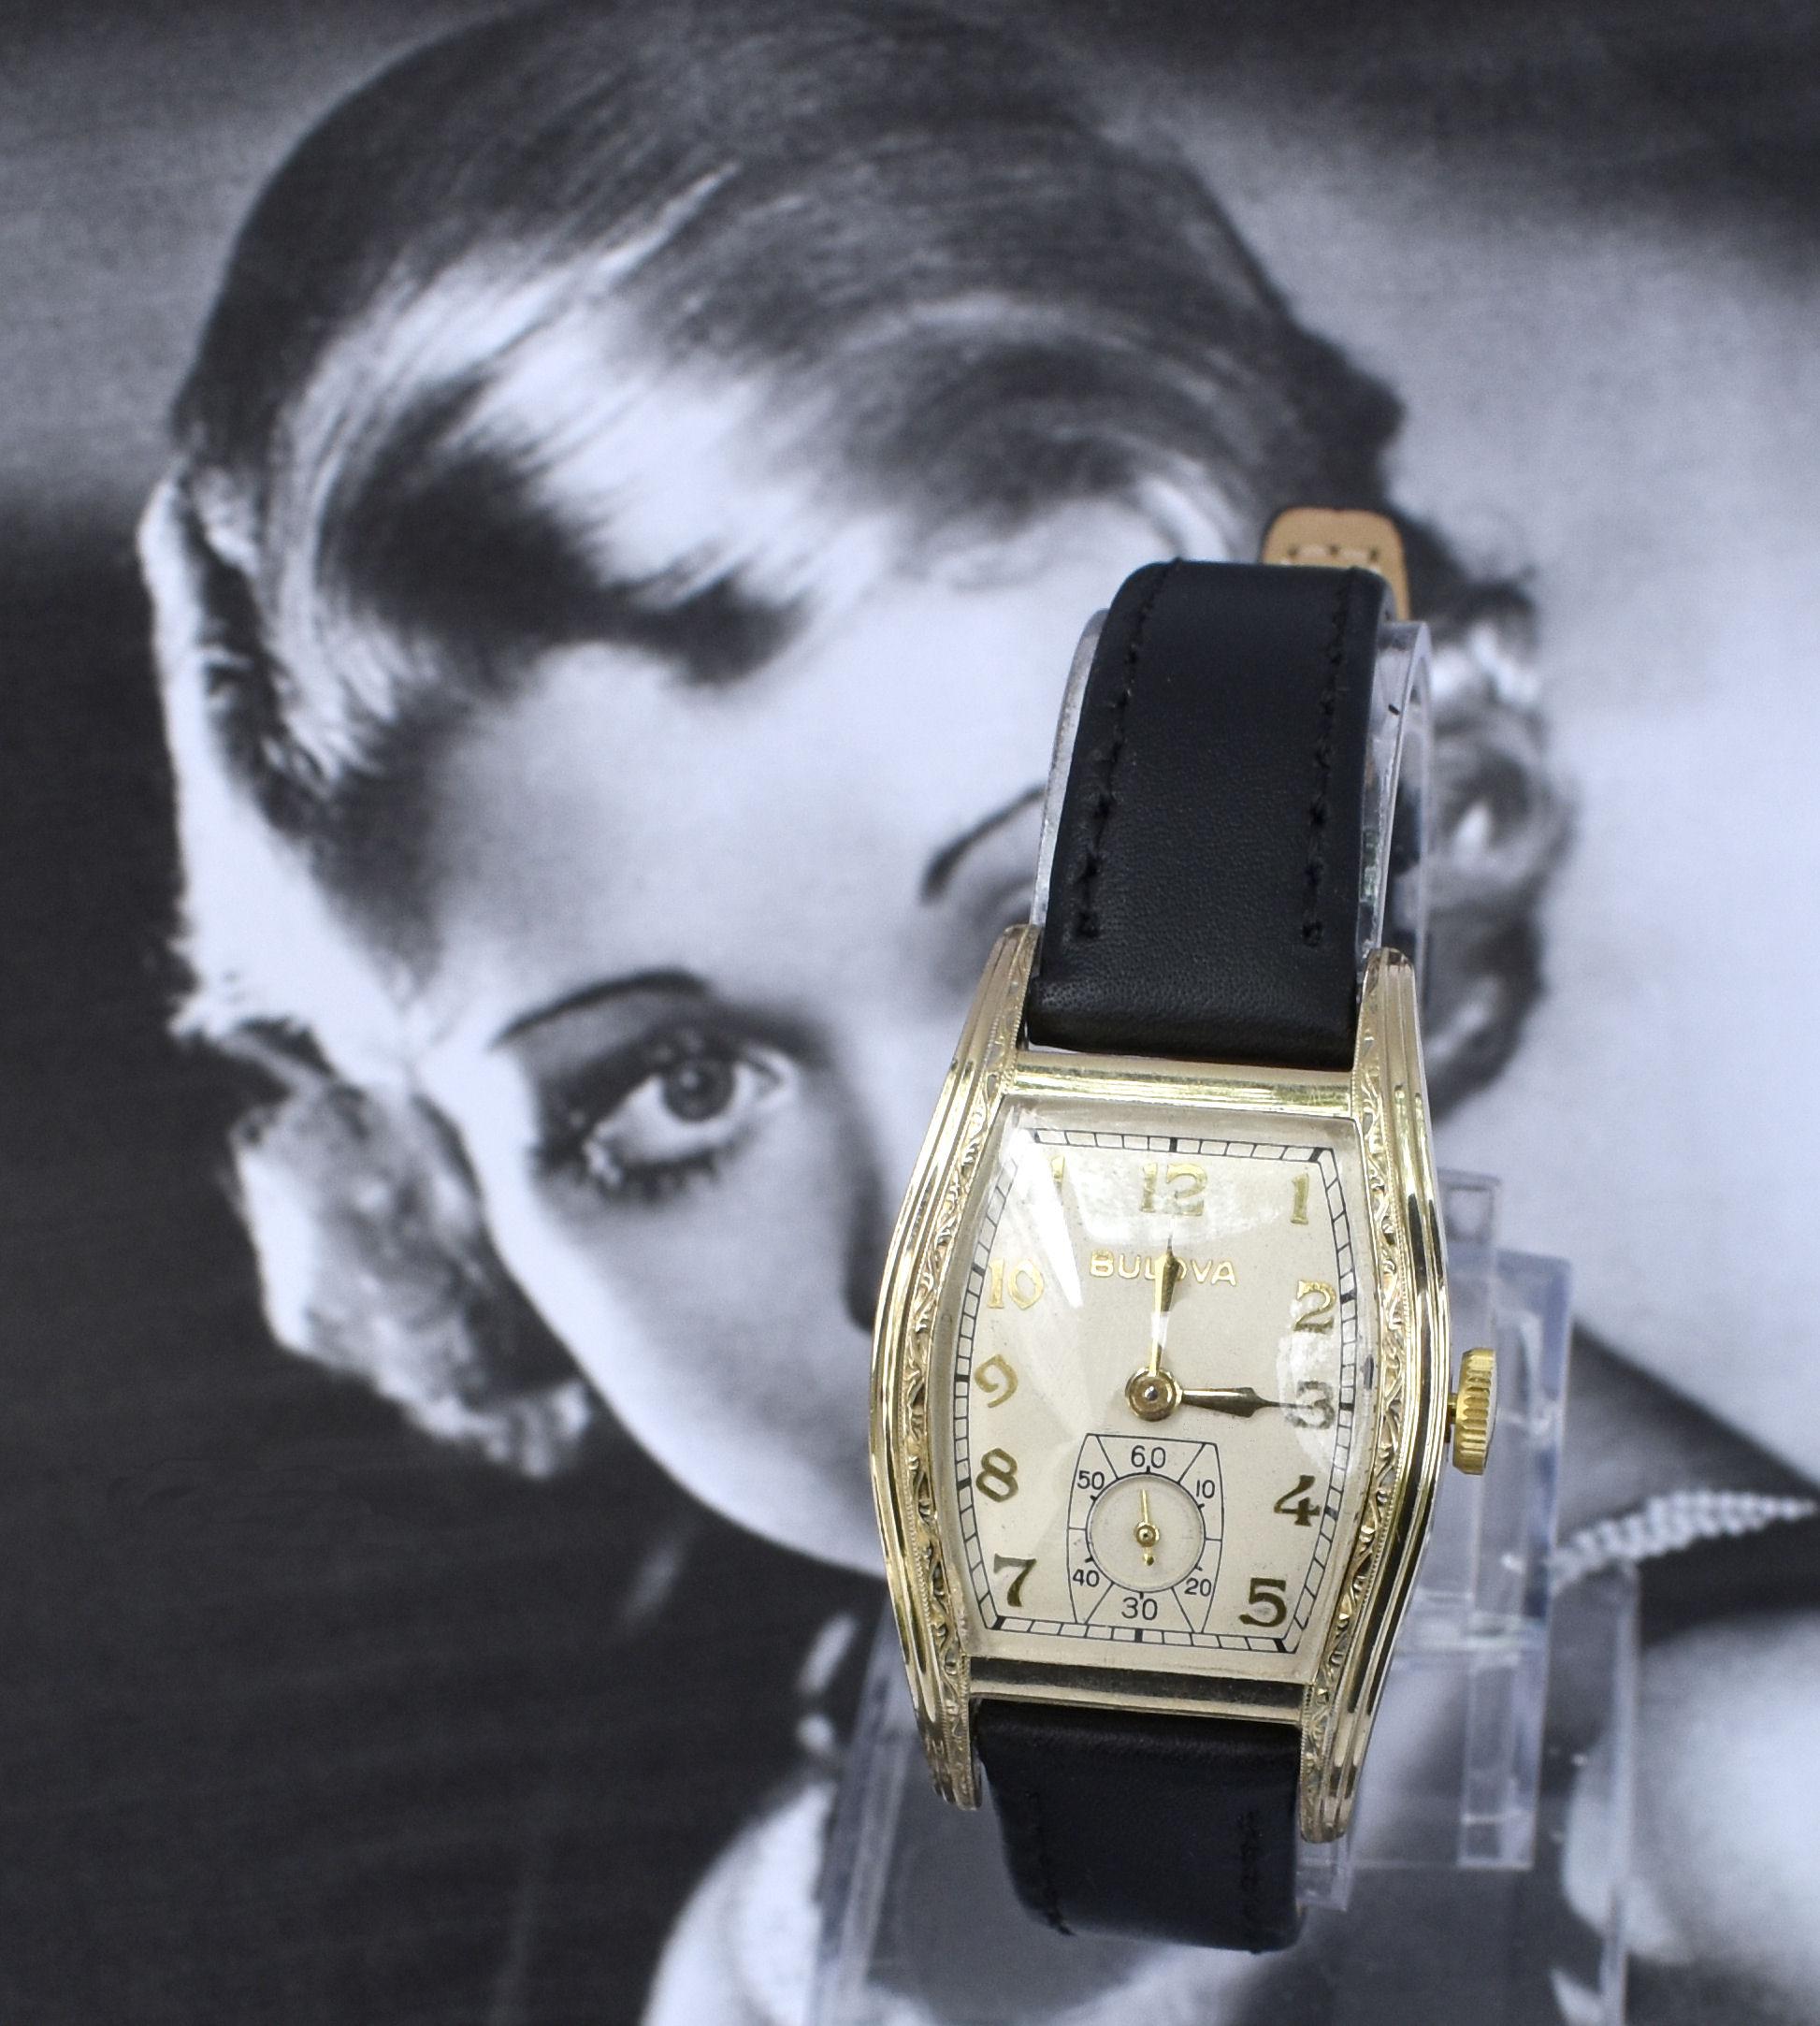 For your consideration is this rather stylish Art Deco 10k rolled gold Gents wristwatch by the American watch company Bulova, this model named Dean, recently serviced and keep good time. This is a great looking watch with a beautiful dial with